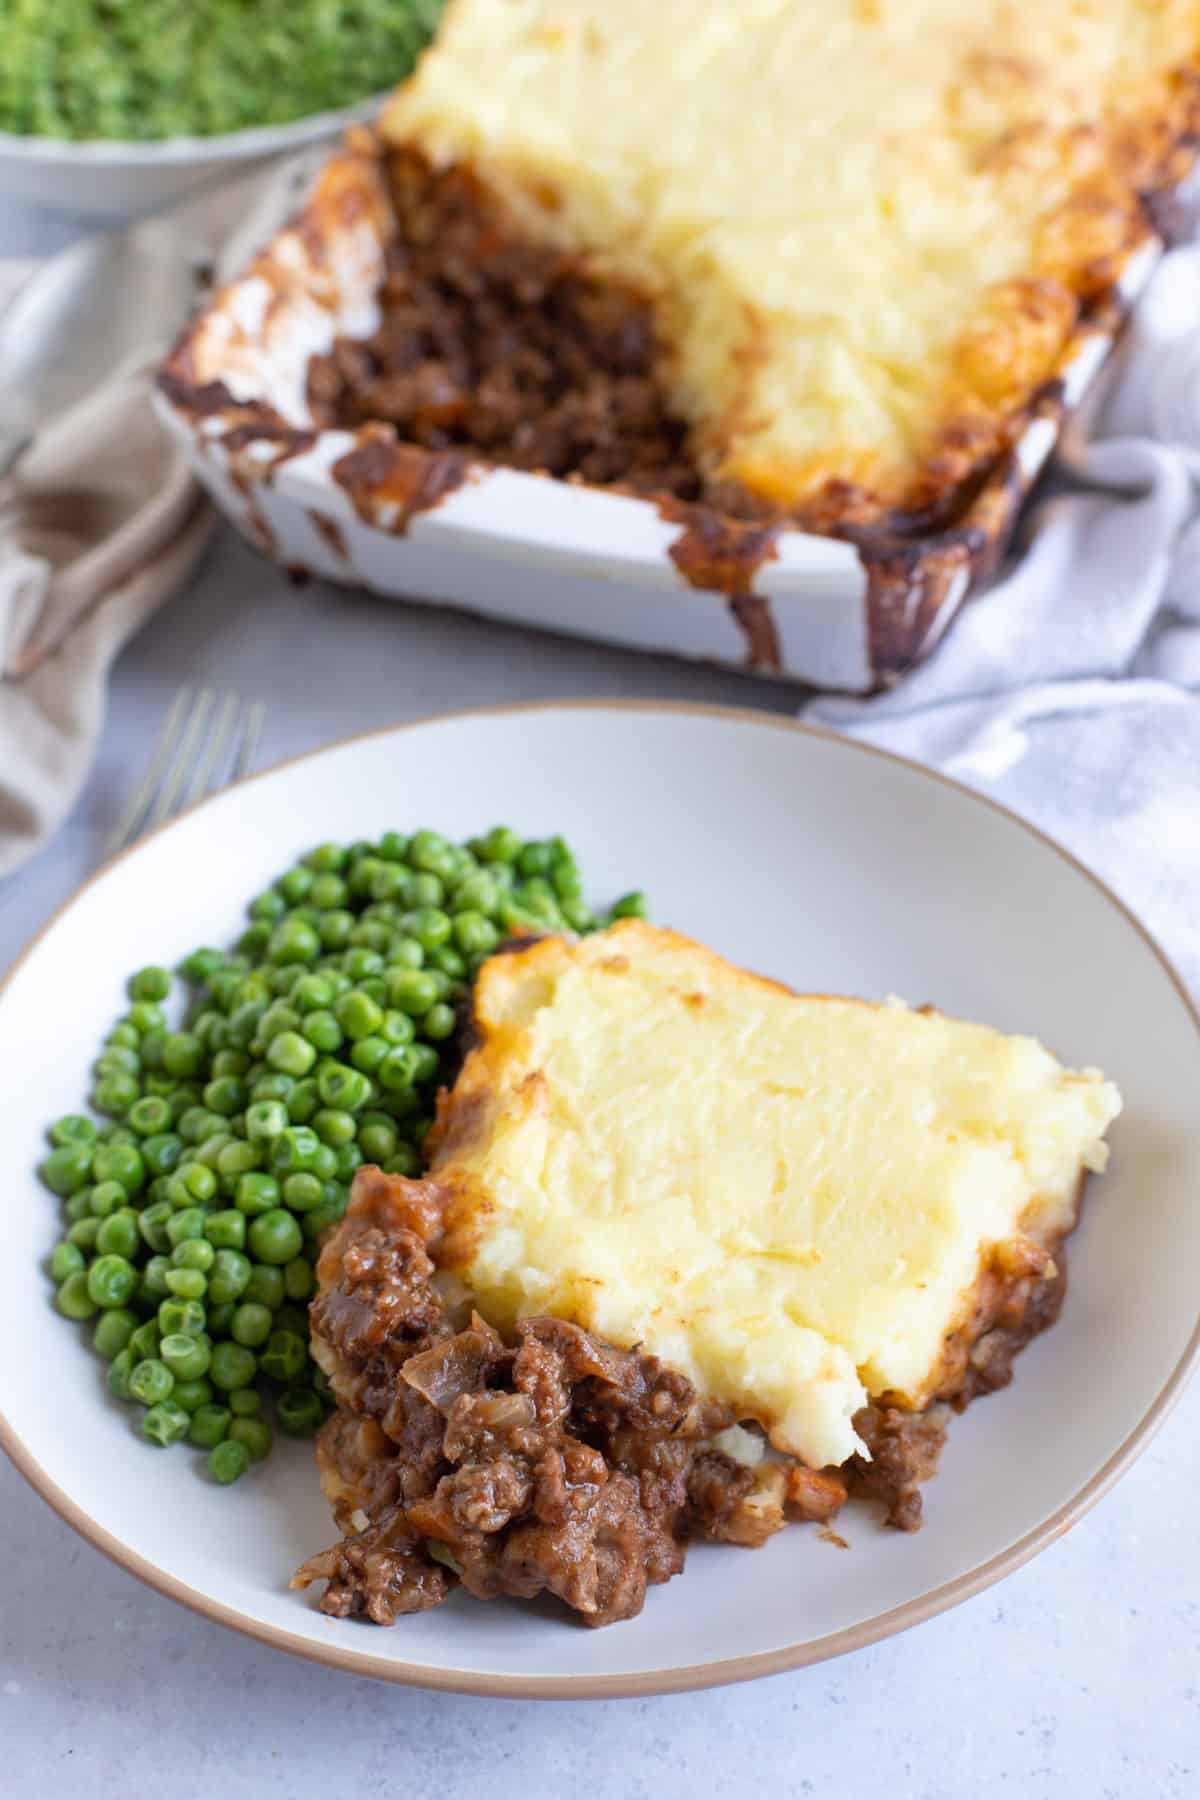 A plate of cottage pie and peas.